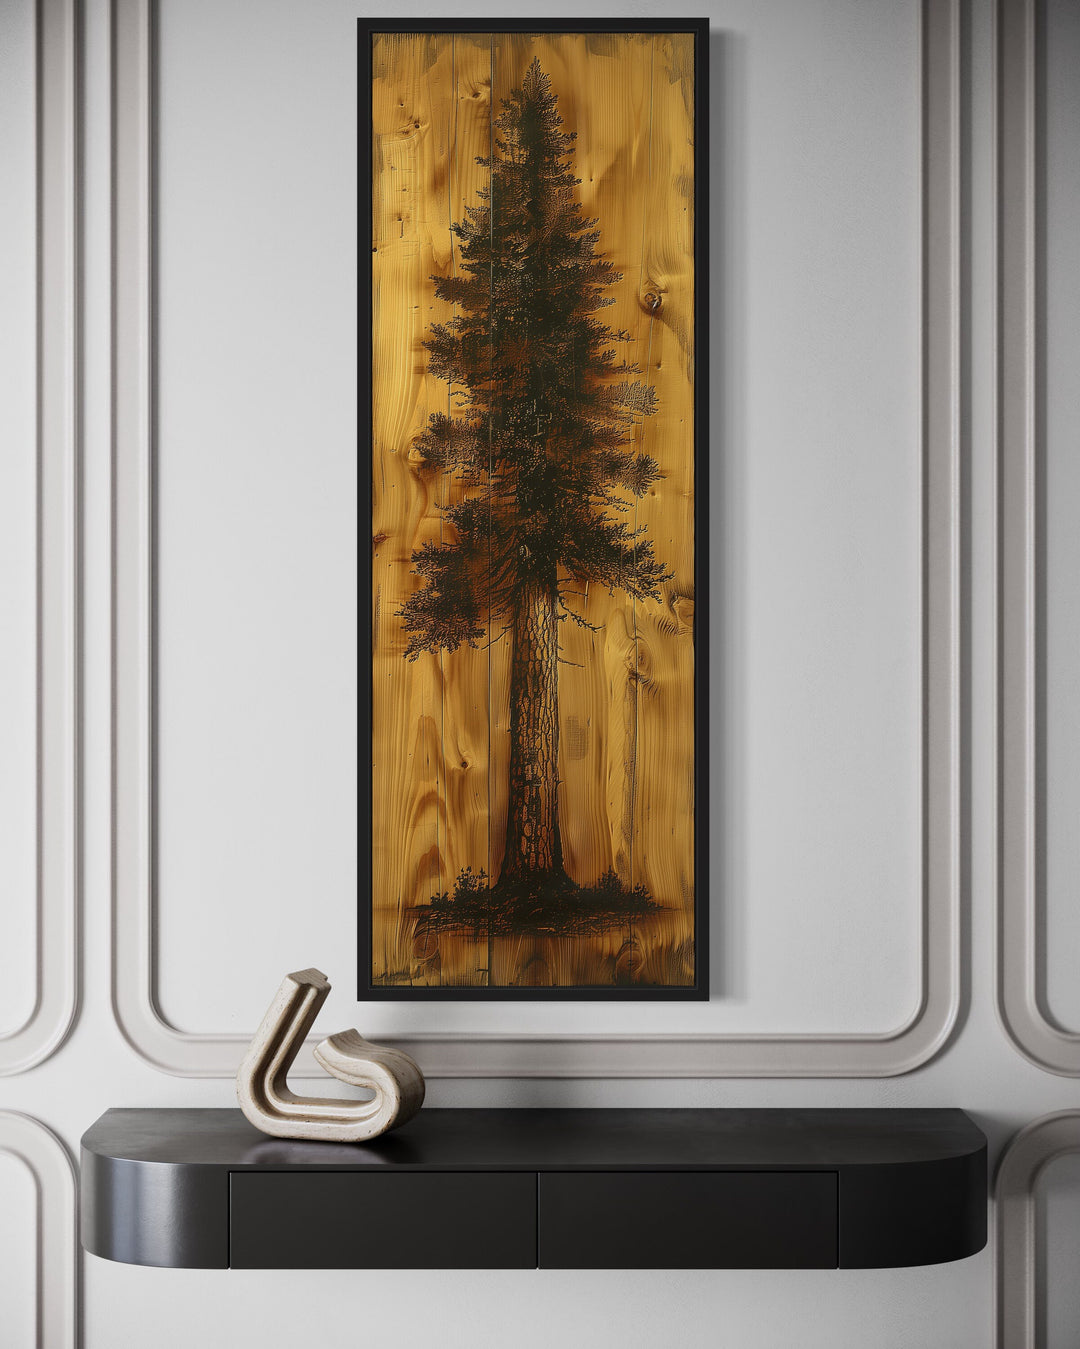 close up view of Tall Narrow Pine Tree Painted On Wood Slice Cabin Vertical Decor